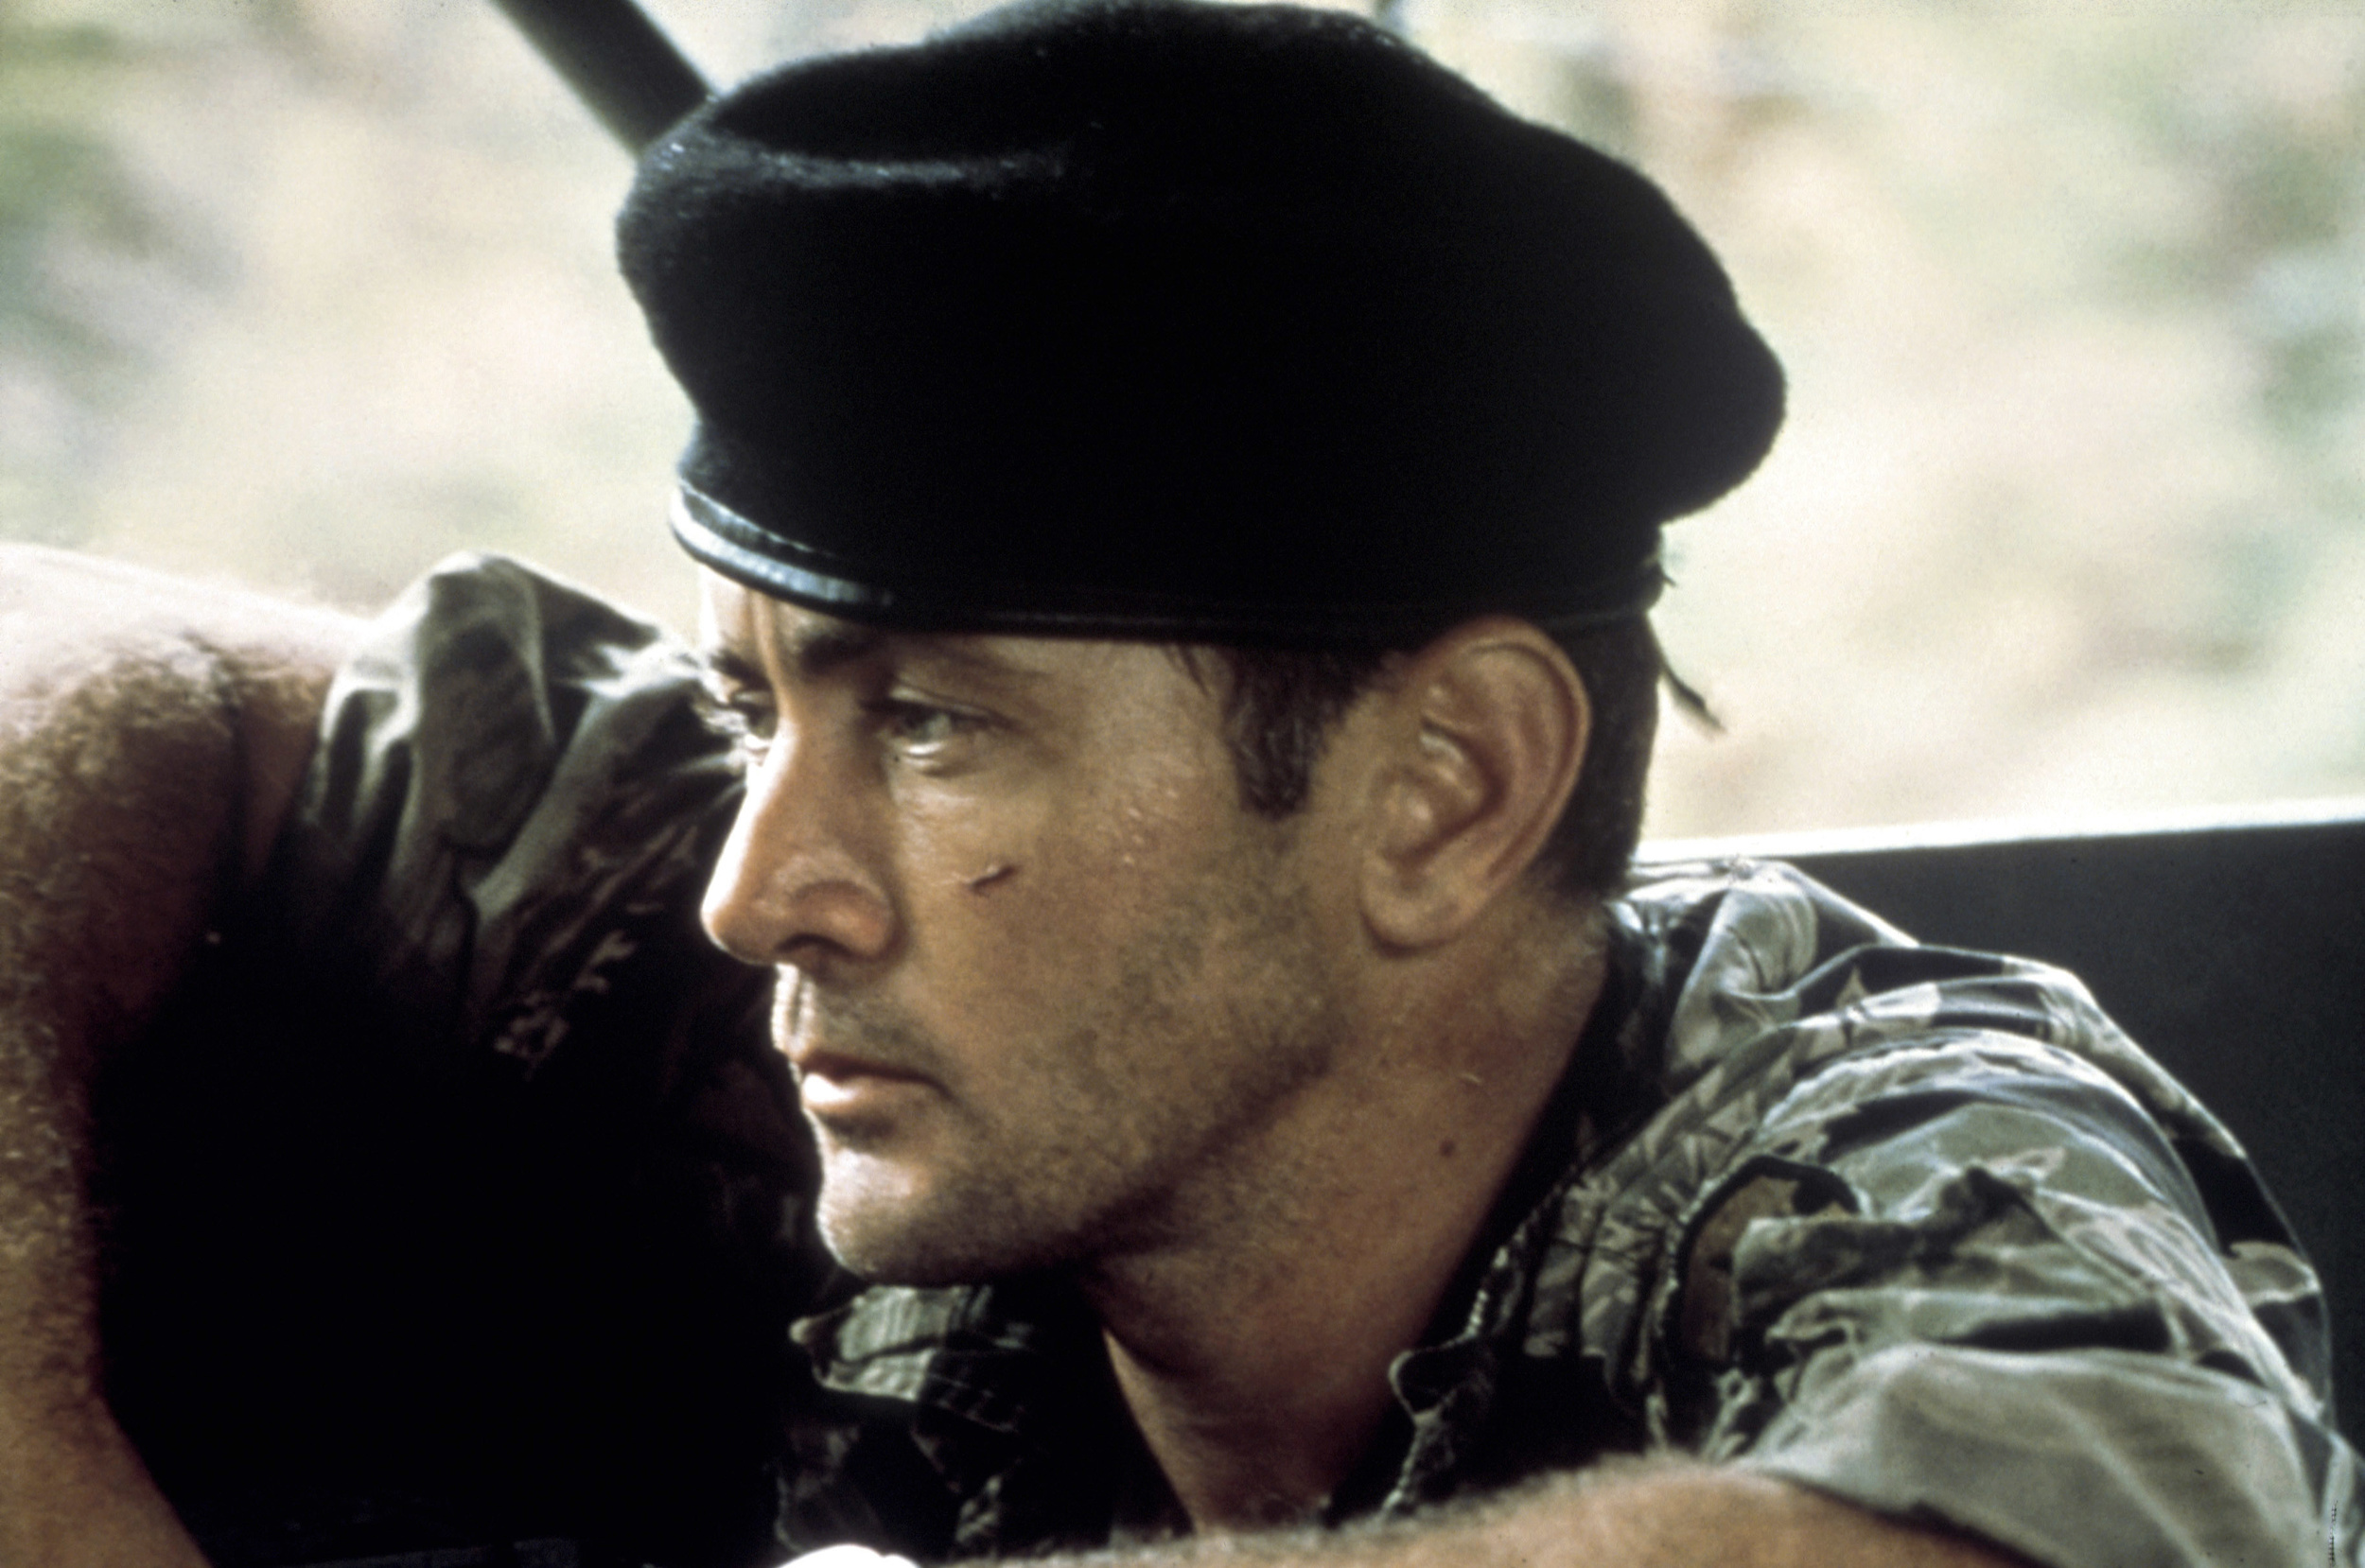 <p>Francis Ford Coppola’s war epic is full of memorable moments and iconic lines, which is probably a relief to him, given that the film almost killed him. That includes the opening of the film, when a distraught Captain Willard laments, “Saigon. Shıt. I’m still only in Saigon.”</p><p>You may also like: <a href='https://www.yardbarker.com/entertainment/articles/father_figures_the_25_best_tv_dads_of_all_time_010524/s1__24160396'>Father figures: The 25 best TV dads of all time</a></p>